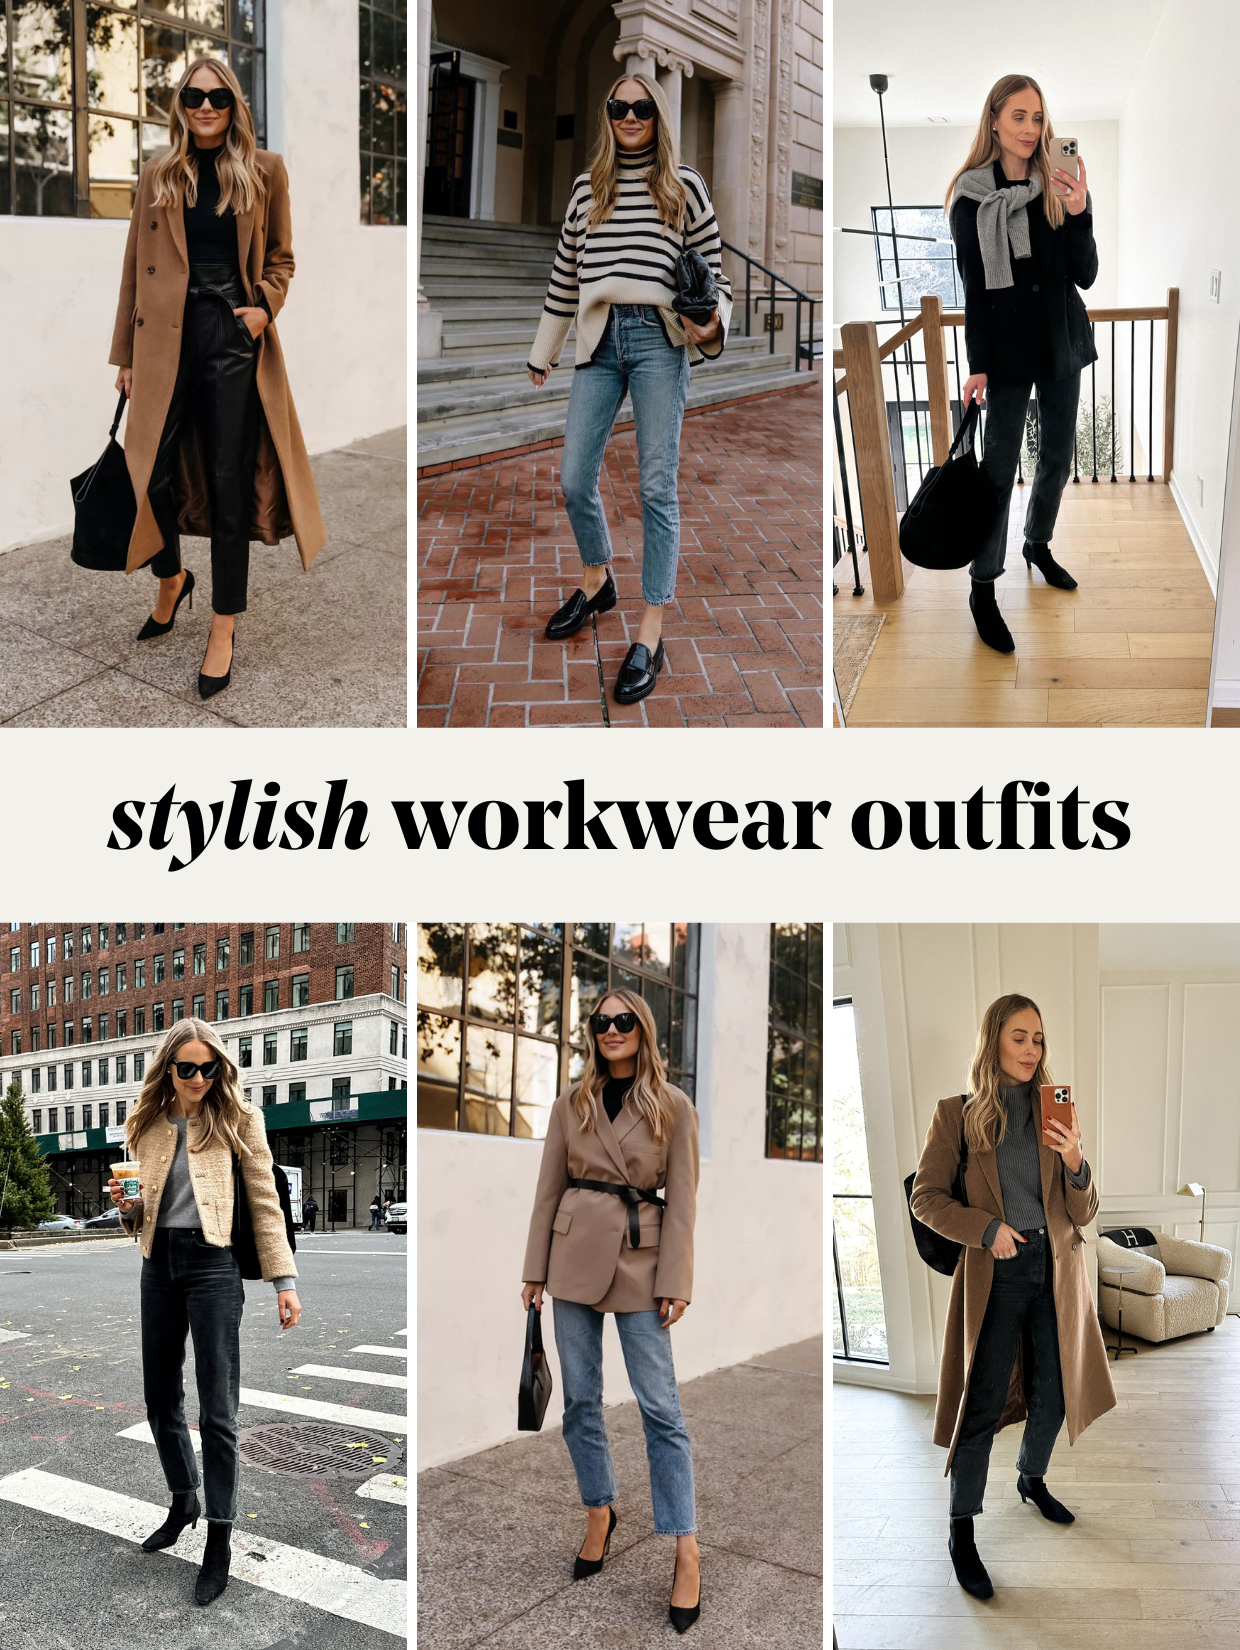 12 Outfit Ideas to Look Chic at the Office - Fashion Jackson